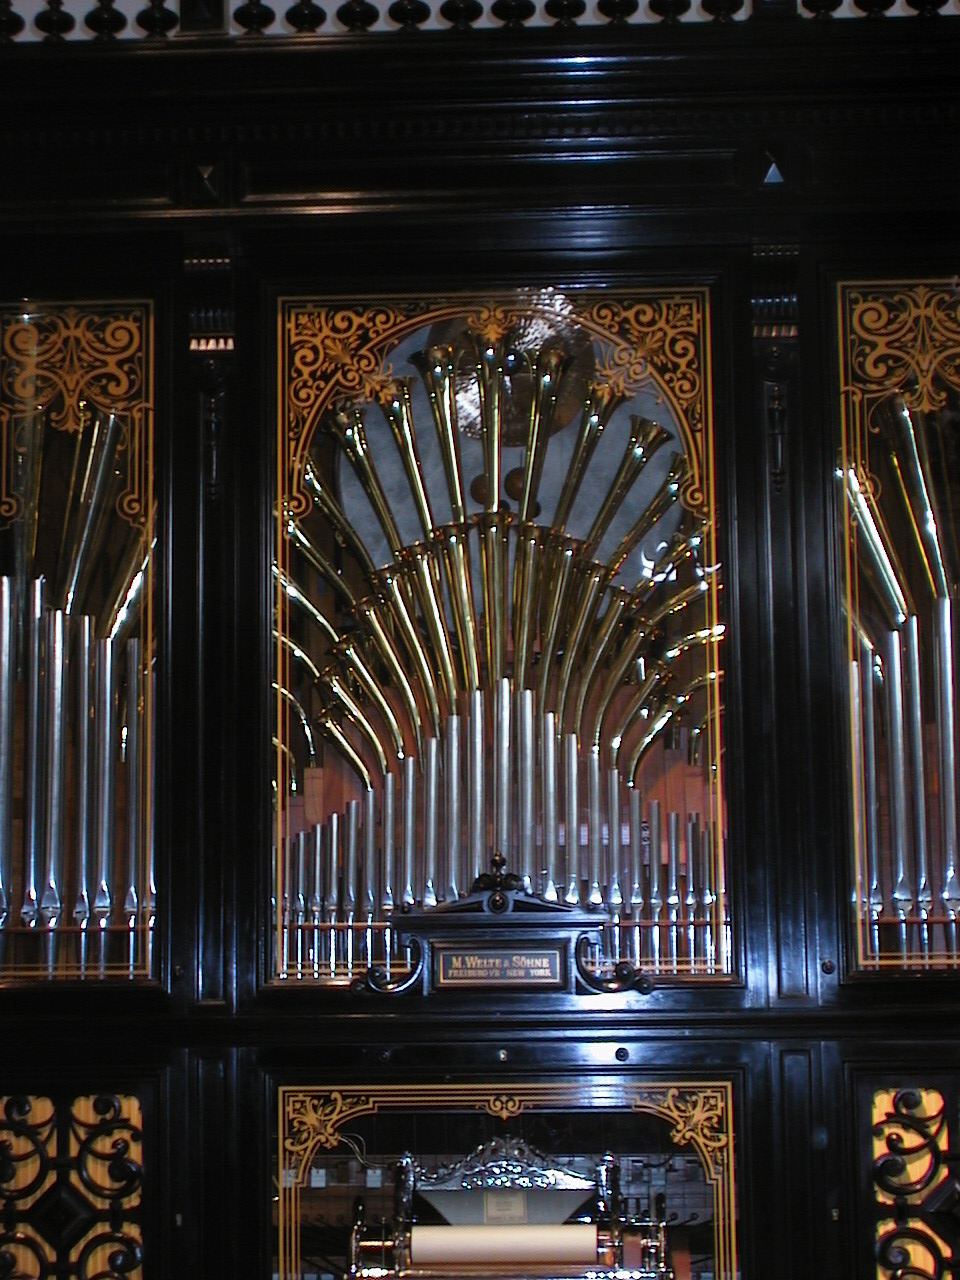 organ and lights, on display in front of windows